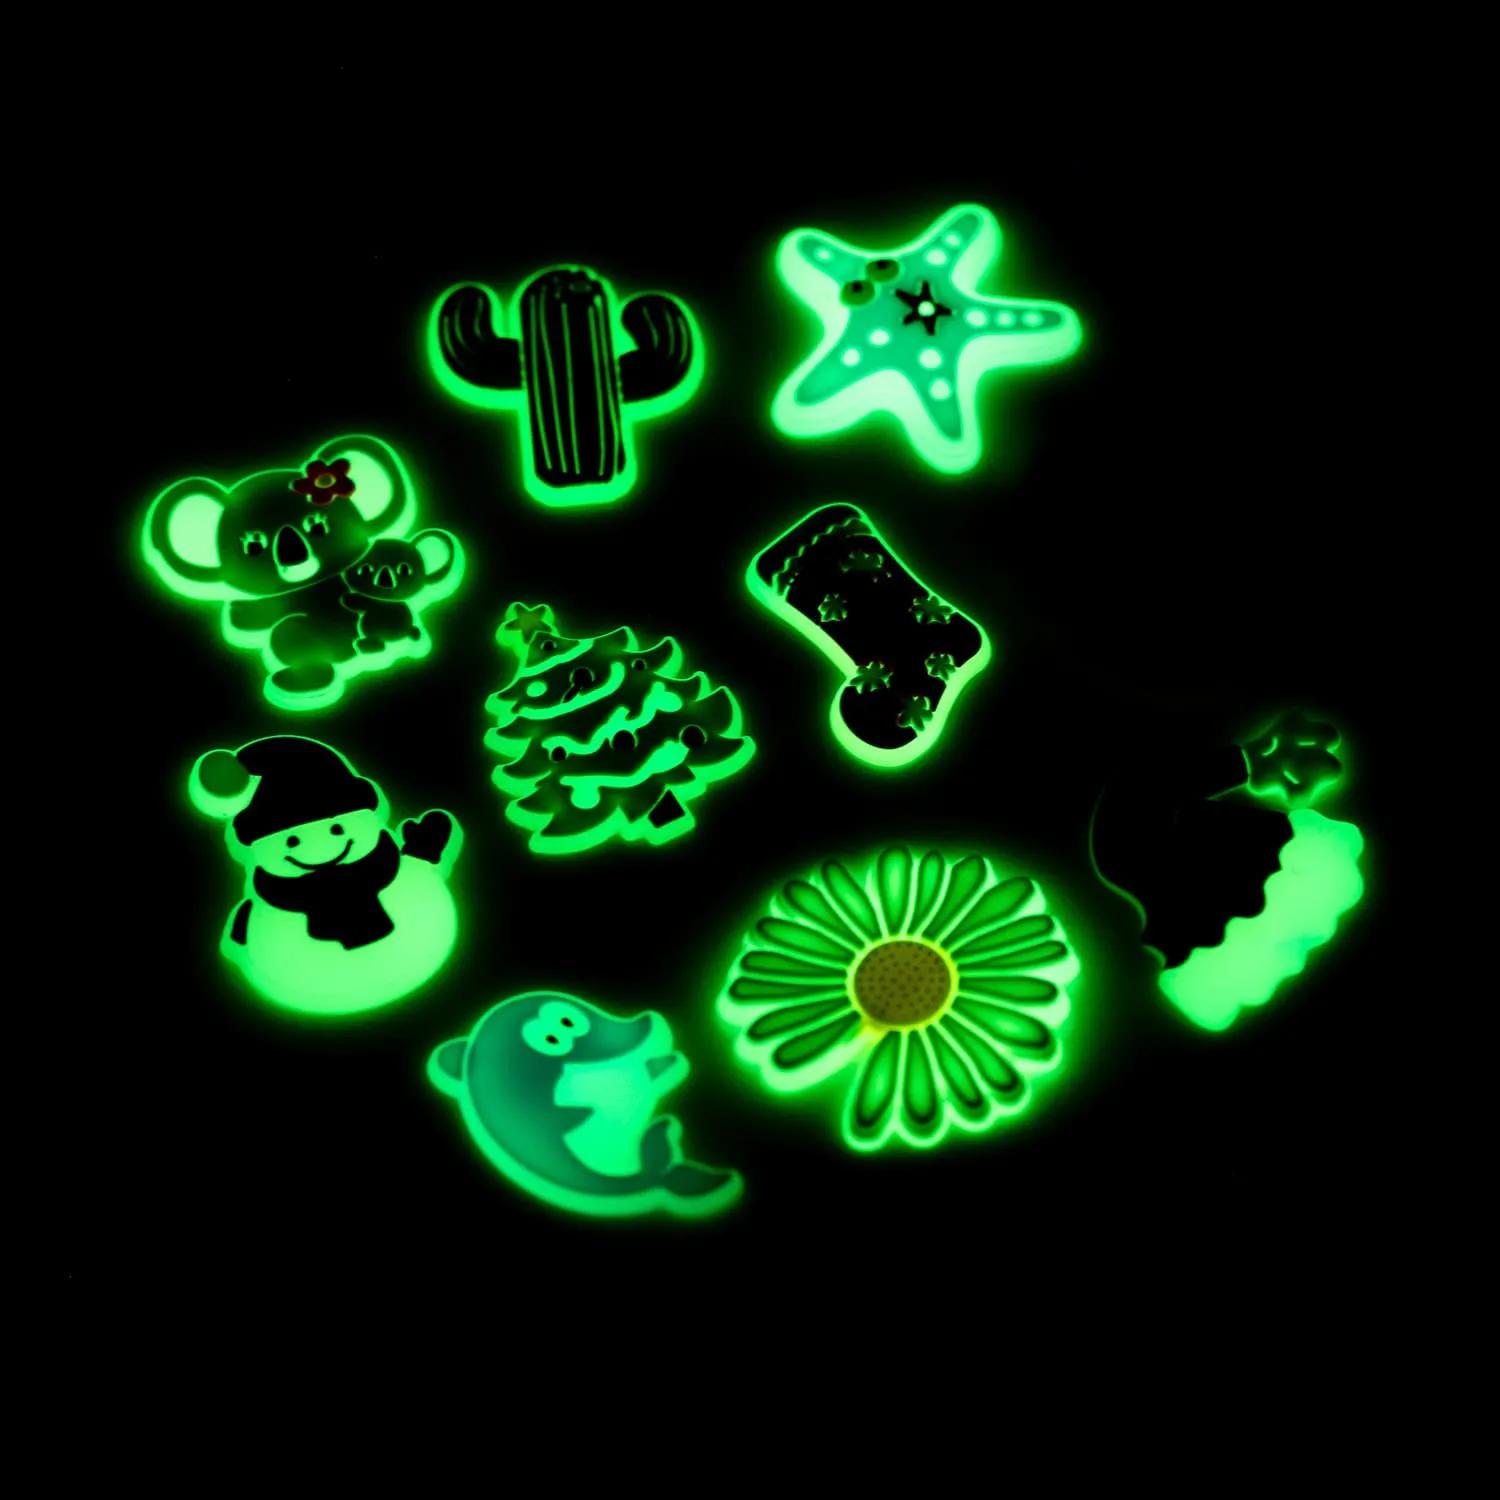 different shoe charms for clog garden shoe slippers contains glows in the dark unisex wristband shoe decoration party gifts